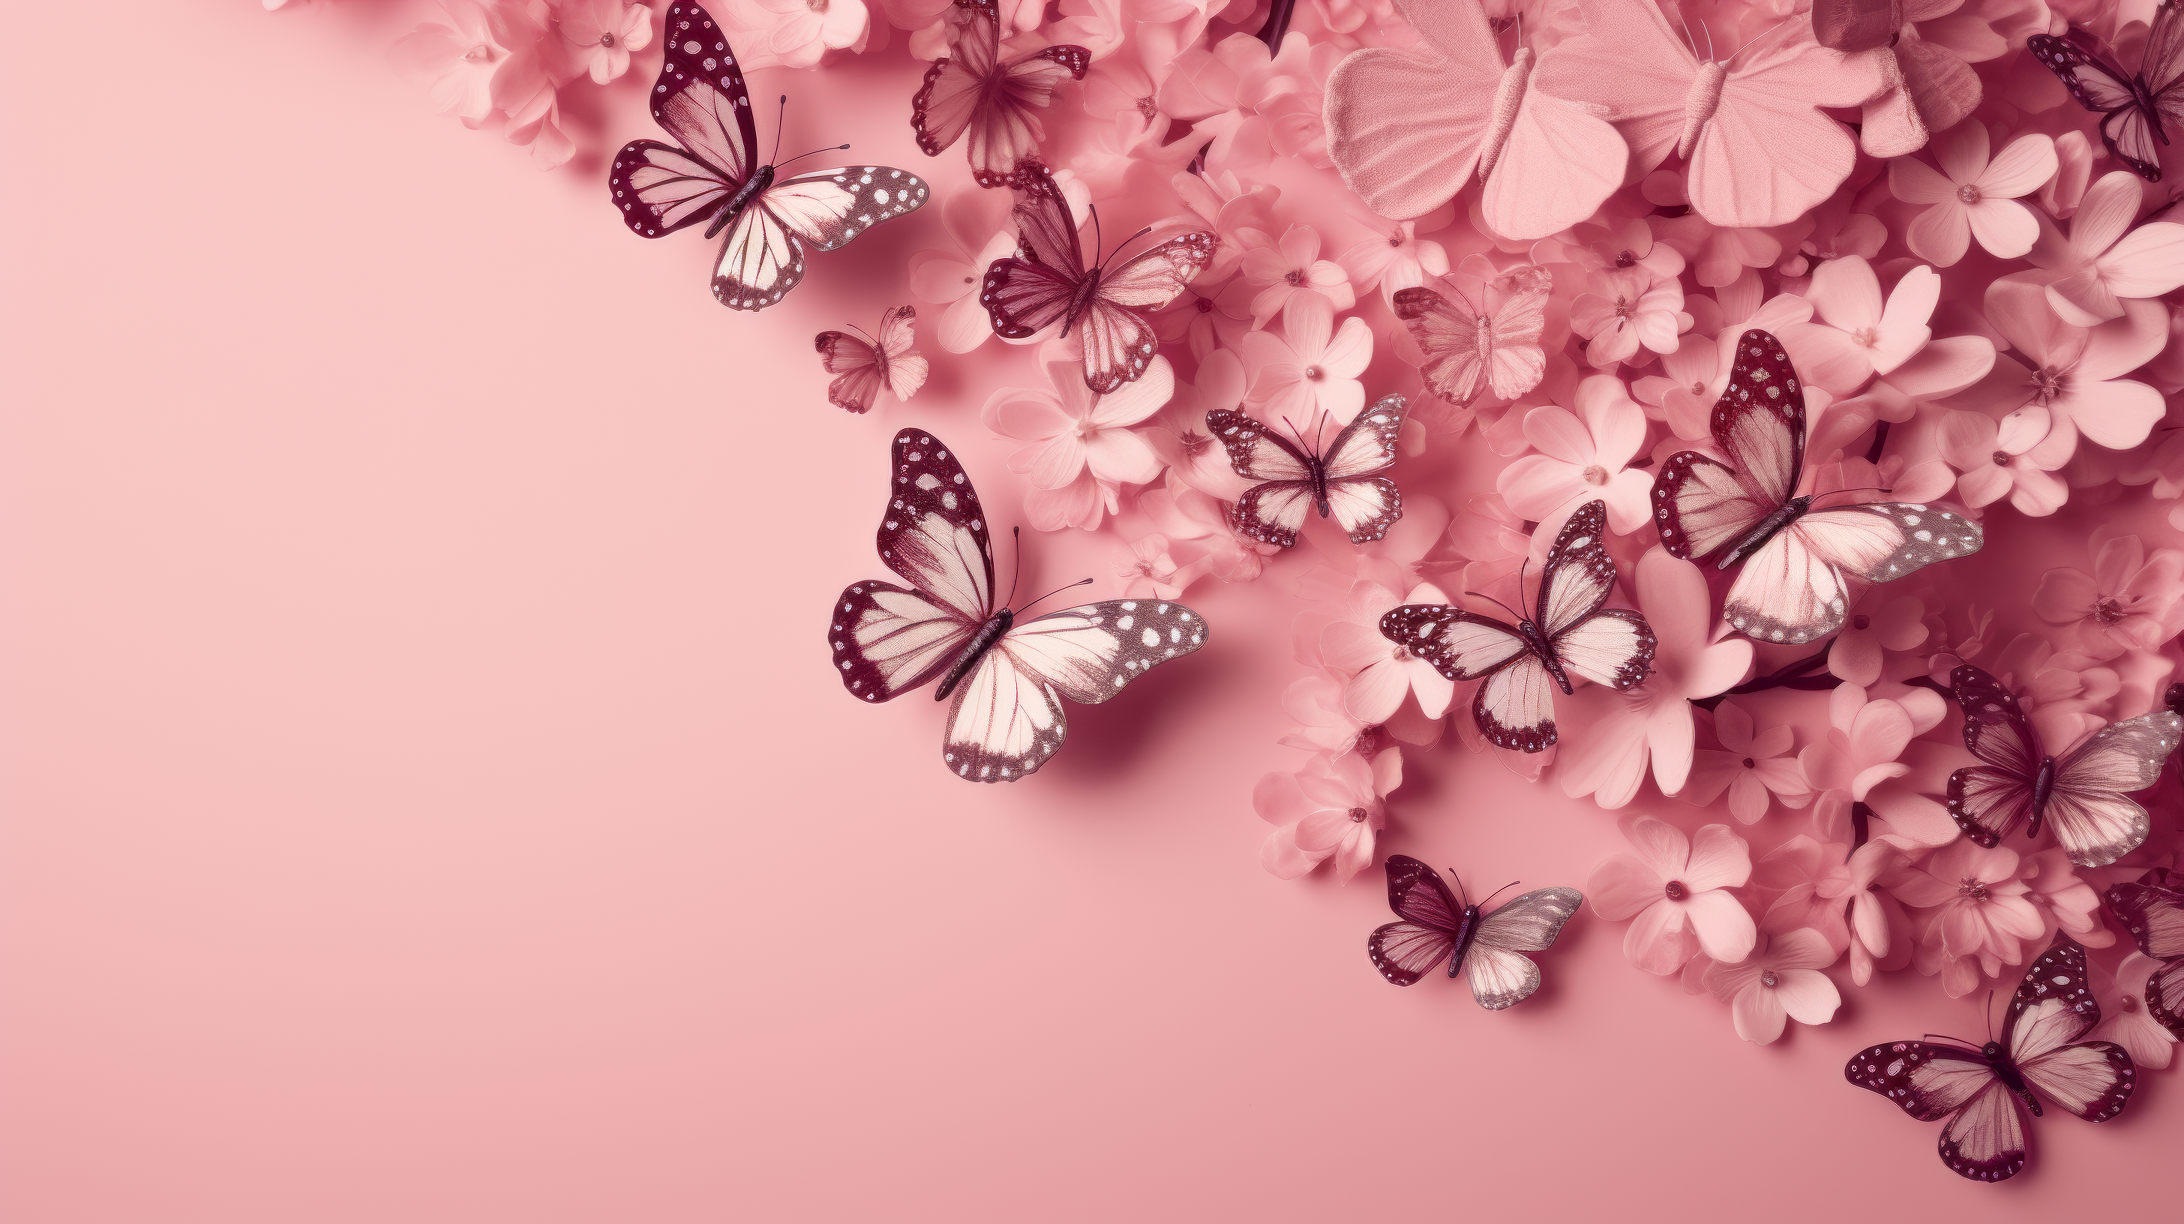 HD desktop wallpaper featuring pink aesthetic flowers and butterflies with a pastel pink background.